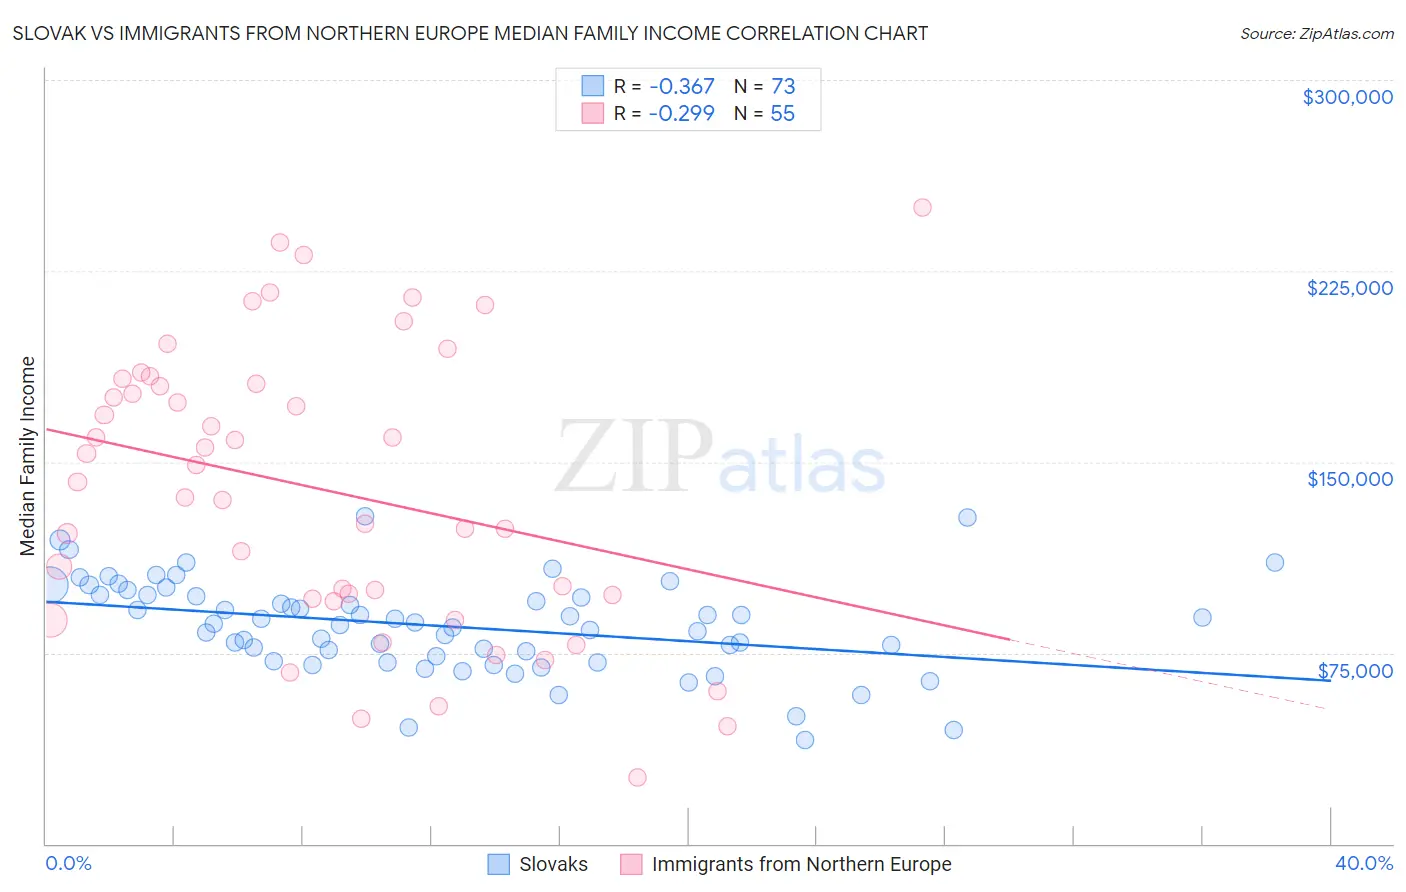 Slovak vs Immigrants from Northern Europe Median Family Income